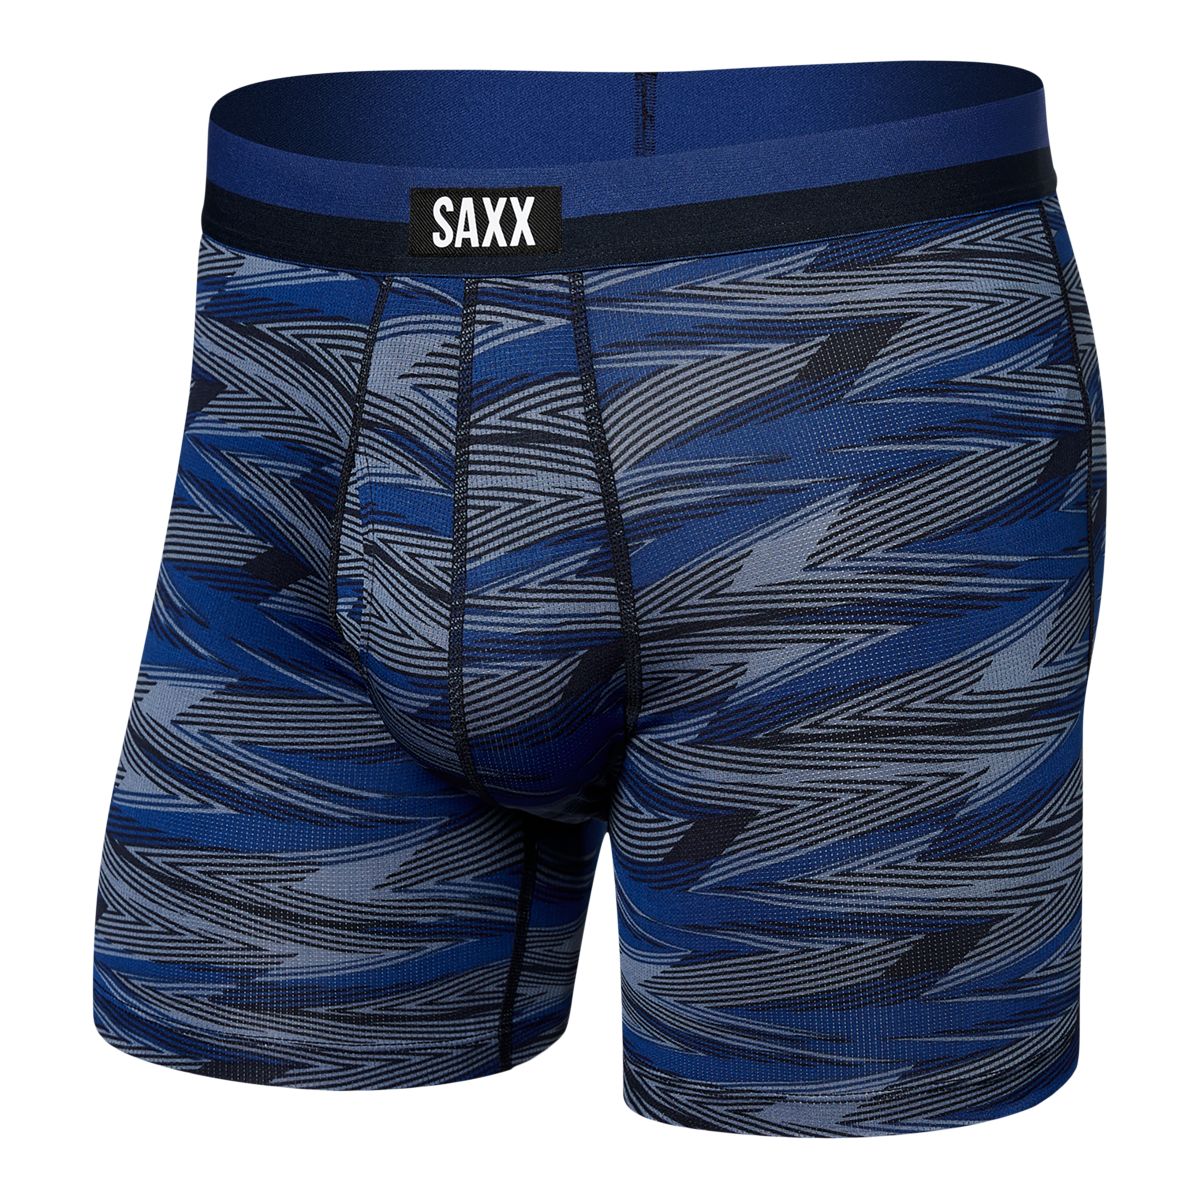 Saxx: Sale, Clearance & Outlet